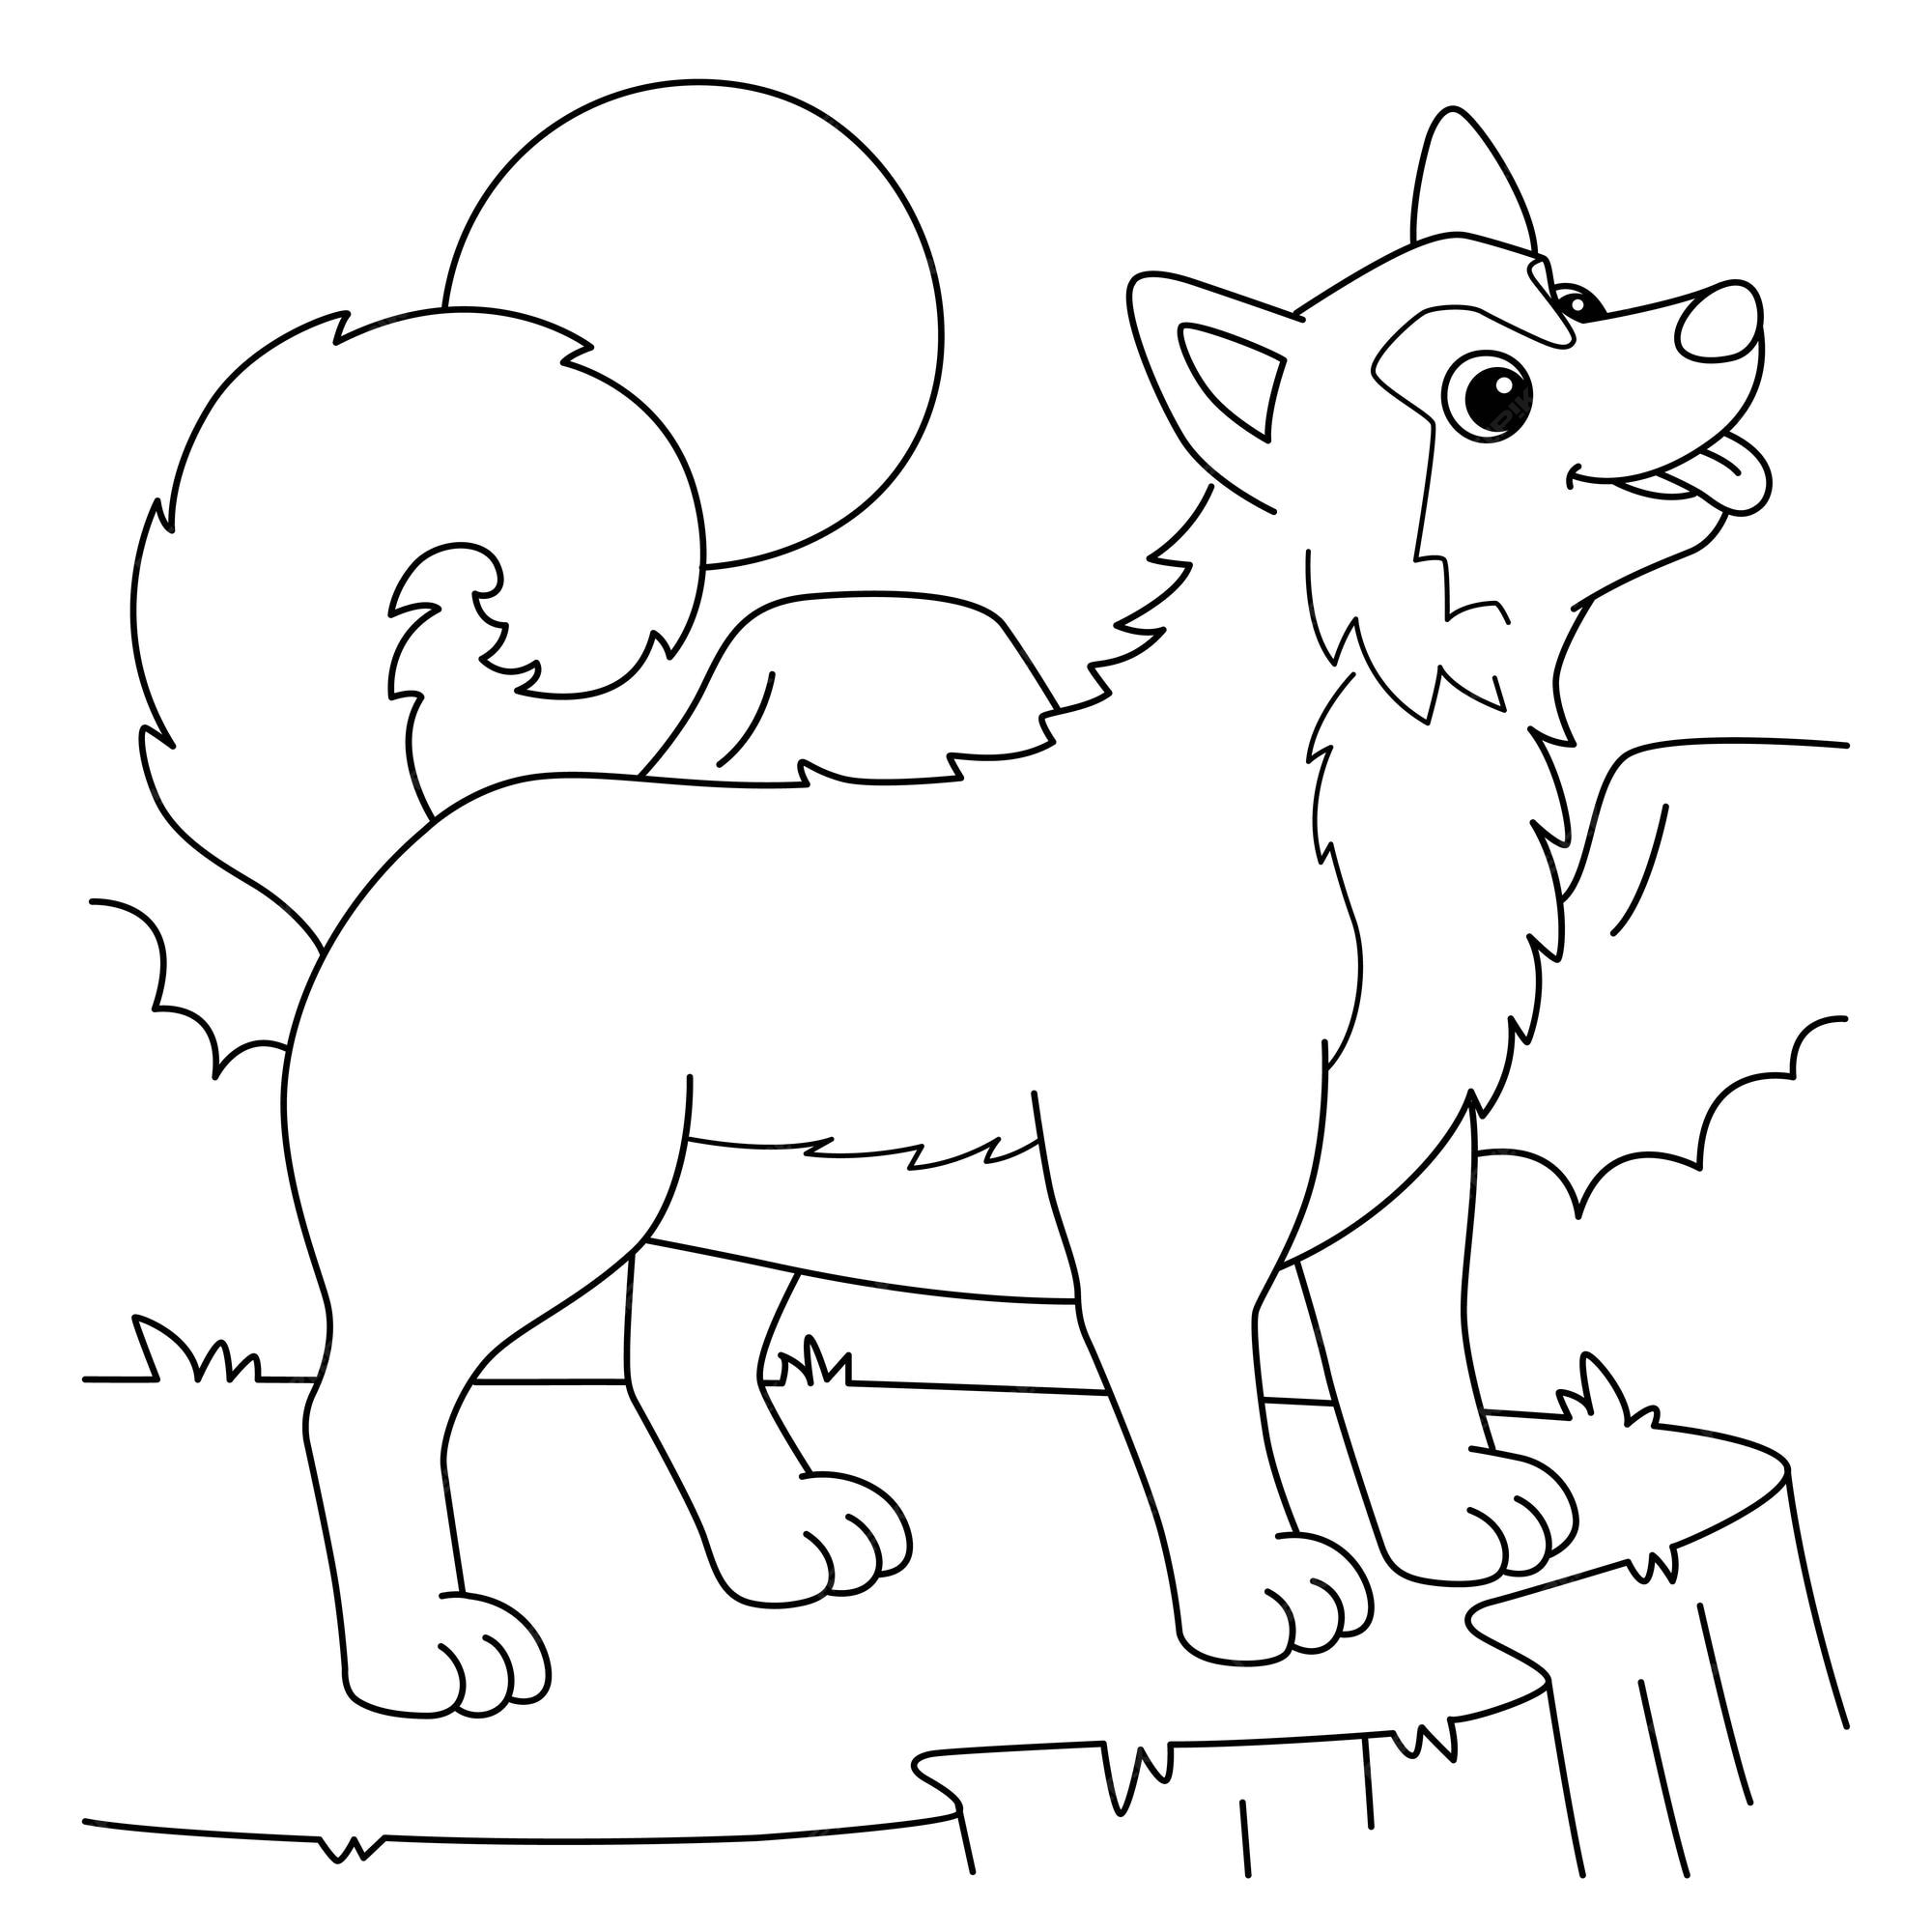 Premium vector siberian husky dog coloring page for kids